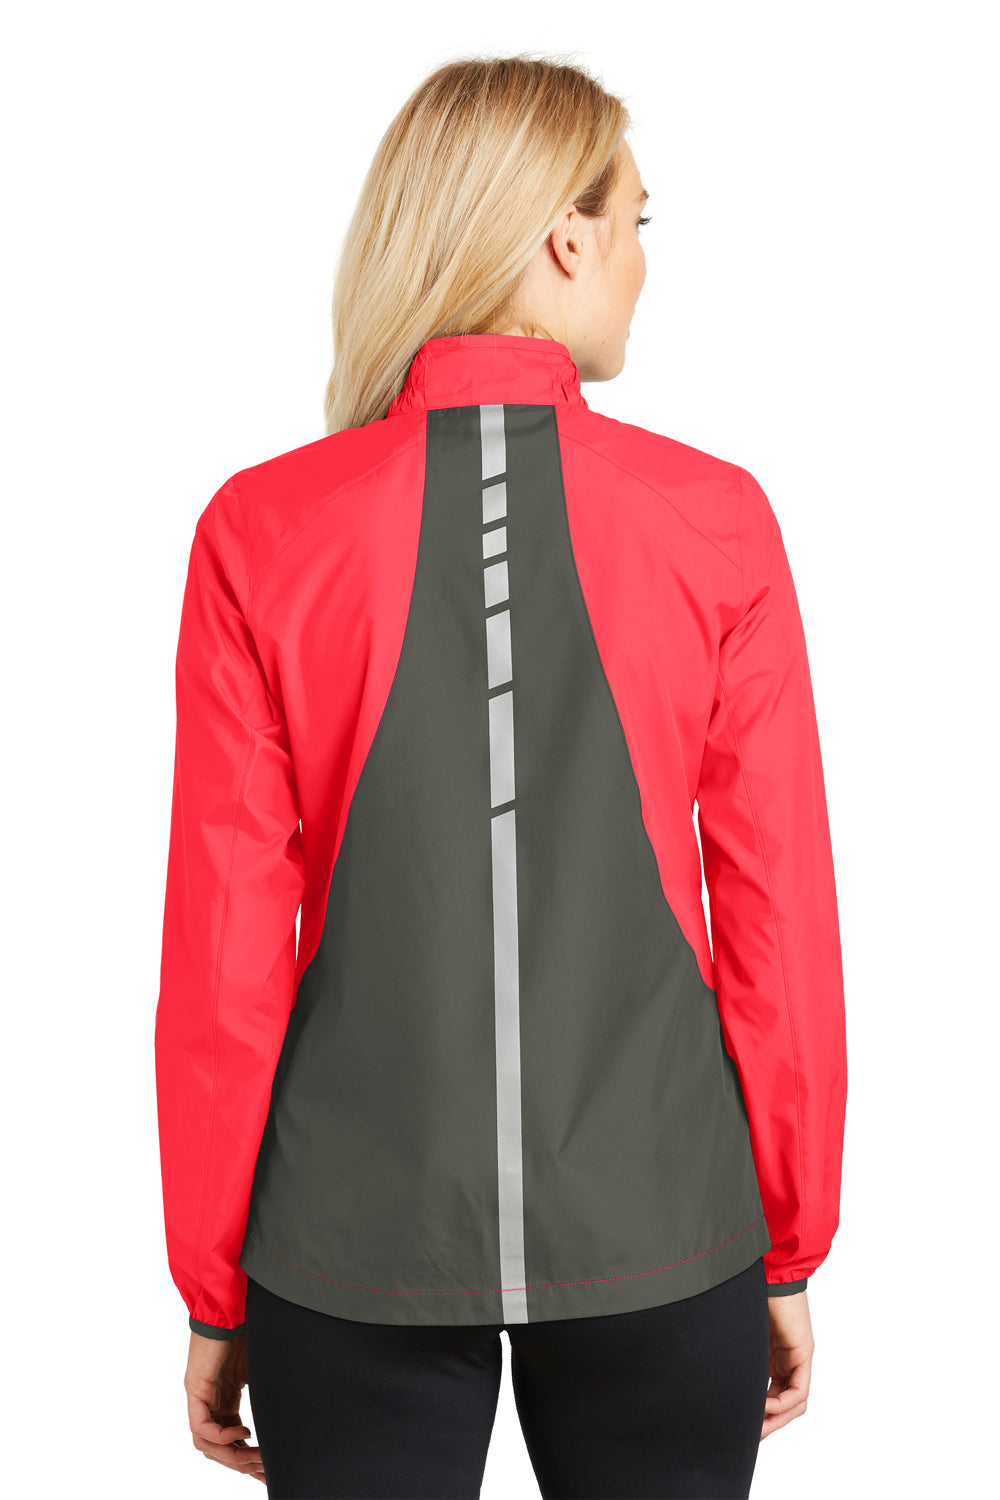 Port Authority L345 Womens Zephyr Reflective Hit Wind & Water Resistant Full Zip Jacket Hot Coral Pink Back